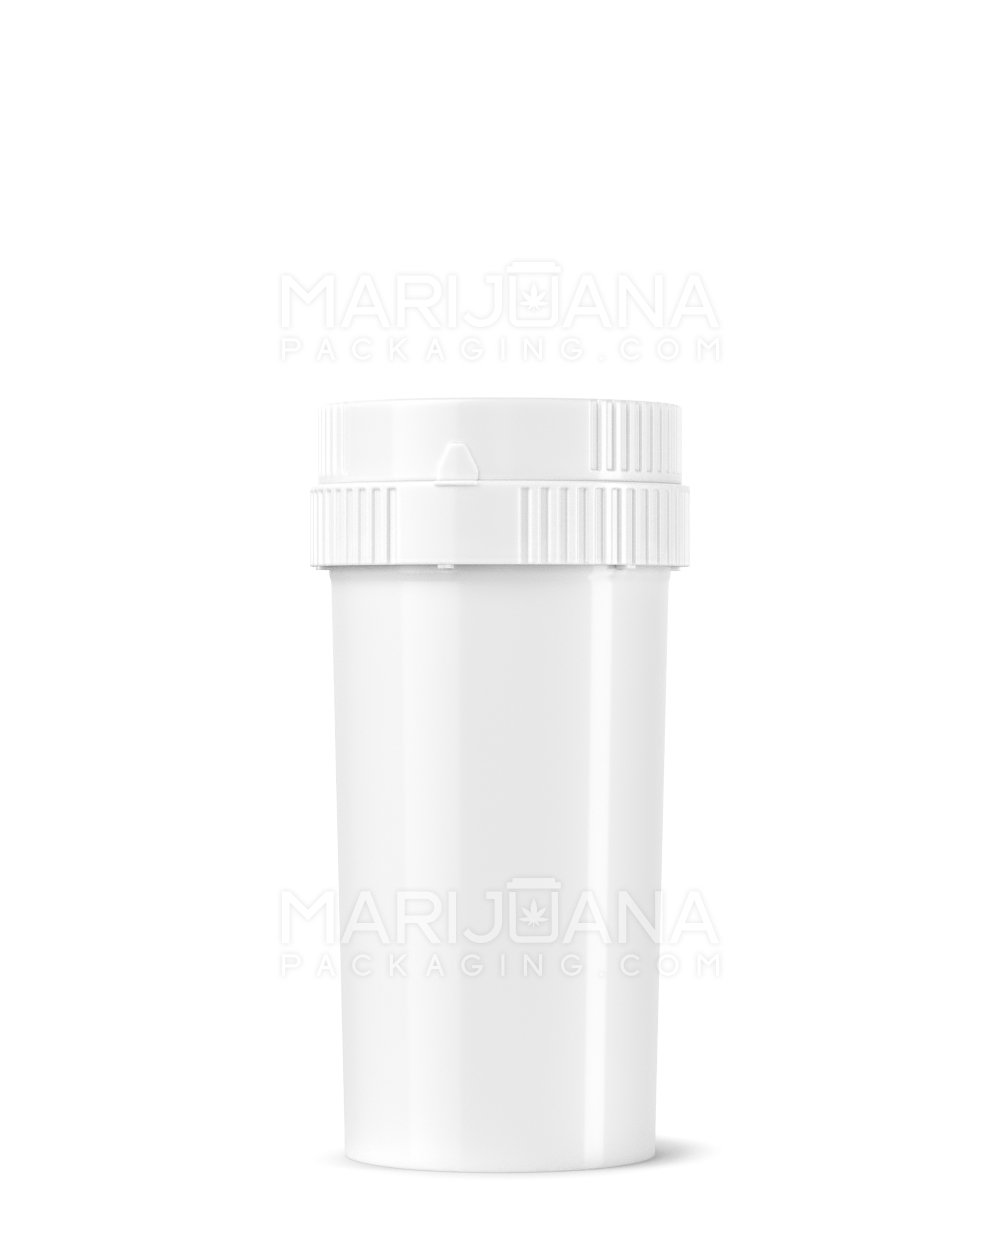 Child Resistant | Push & Turn Vial with Grinder Cap | 40dr - White Plastic - 150 Count - 5